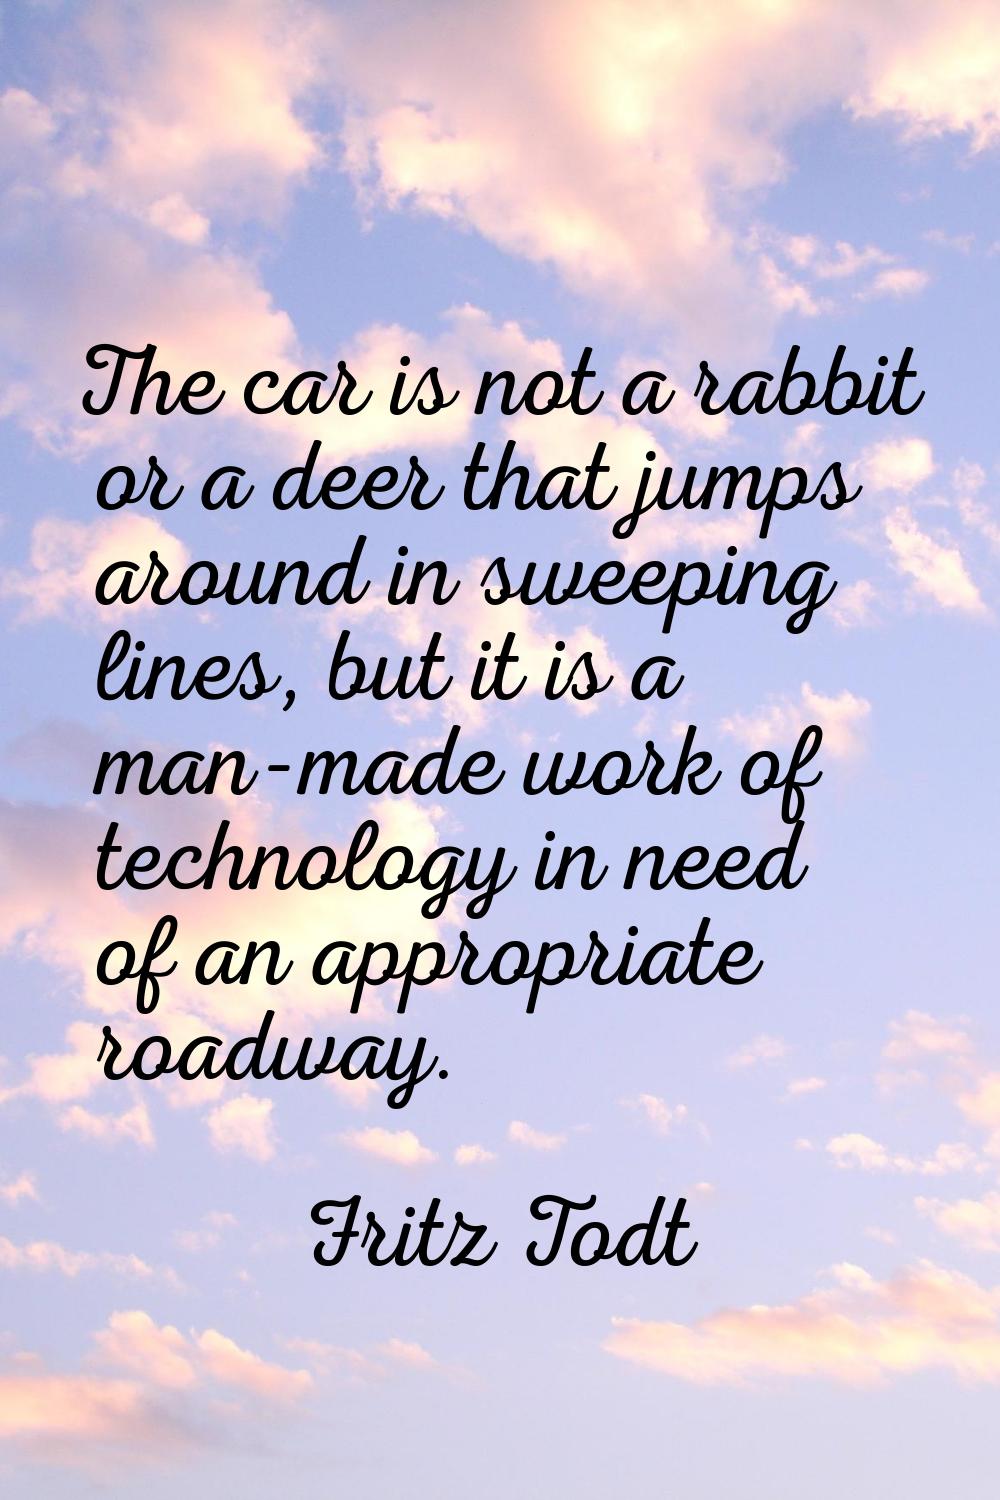 The car is not a rabbit or a deer that jumps around in sweeping lines, but it is a man-made work of